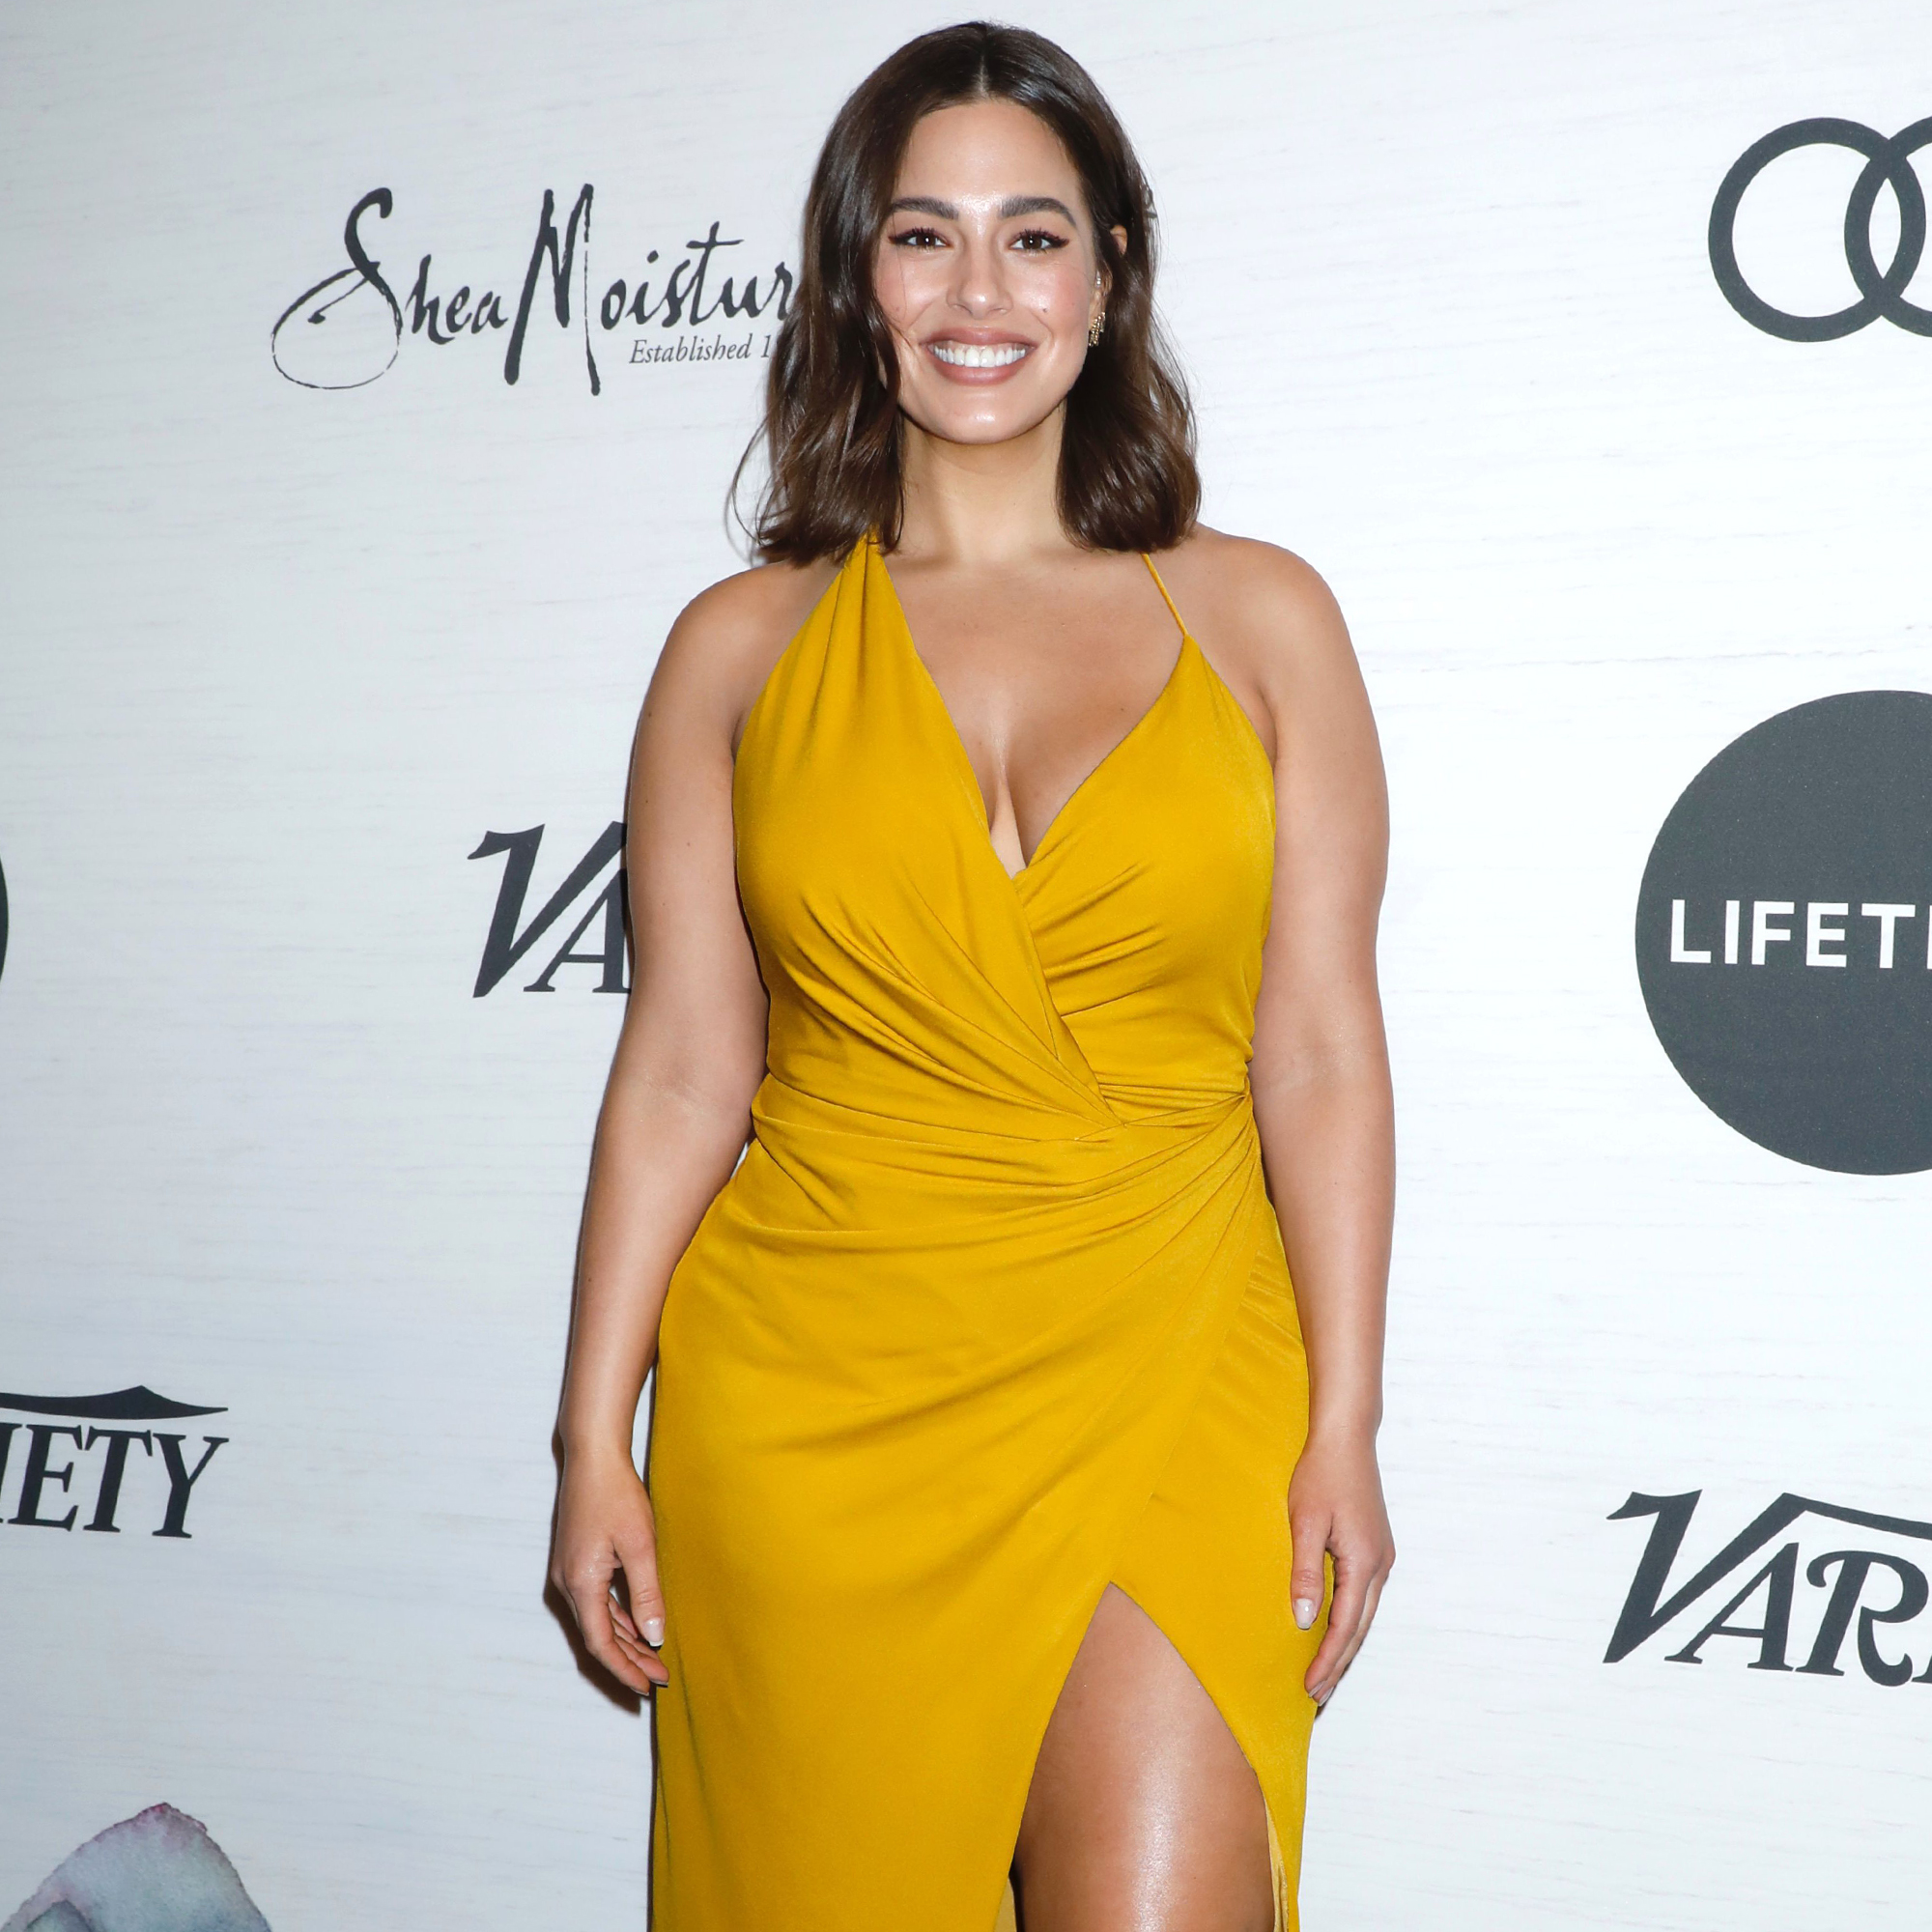 Pregnant Ashley Graham Praised for Nude Photo With Stretch Marks